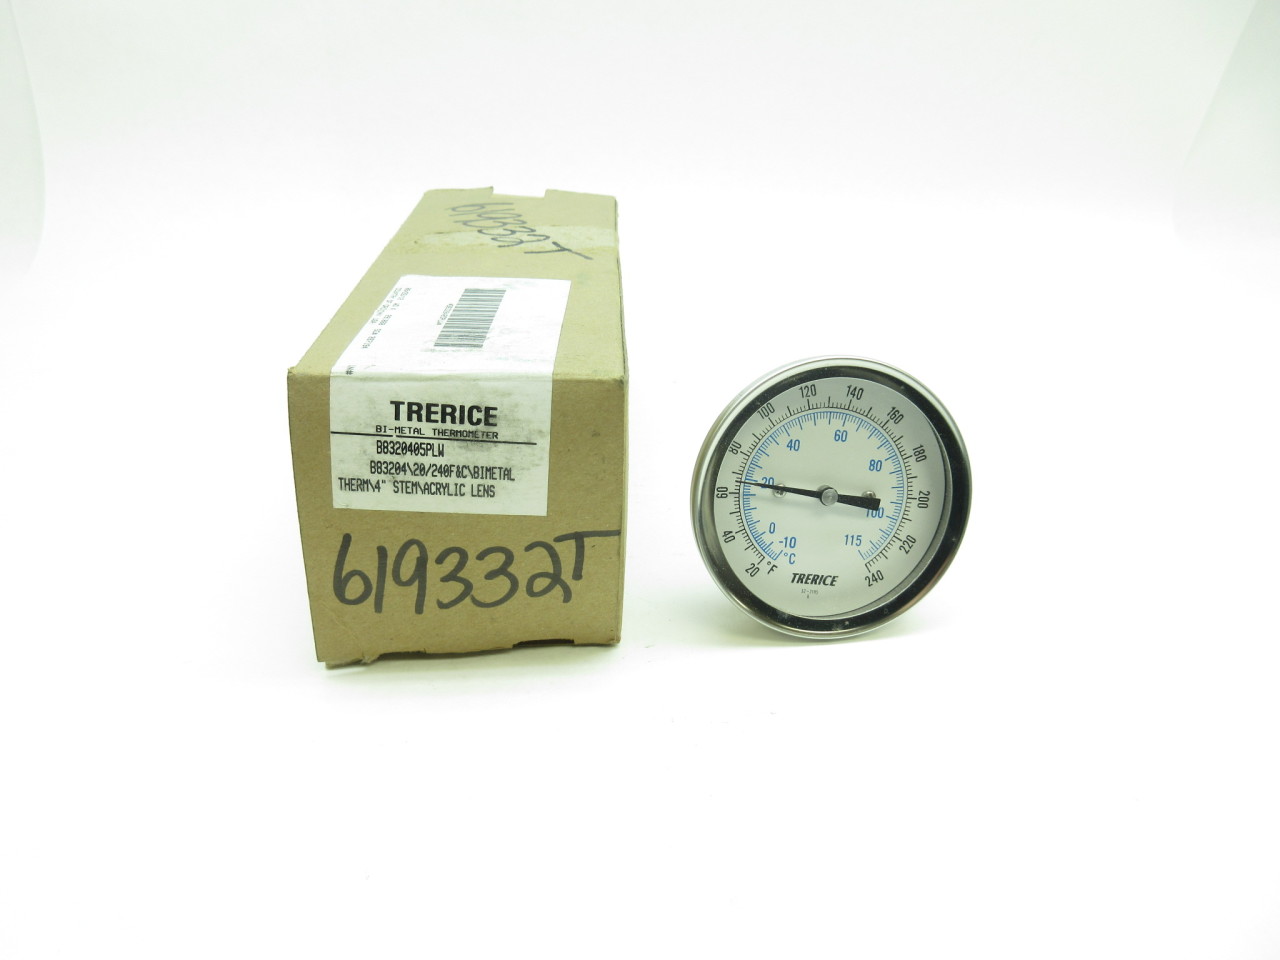 Details about   TRERICE ECONO THERMOMETER 435210207 